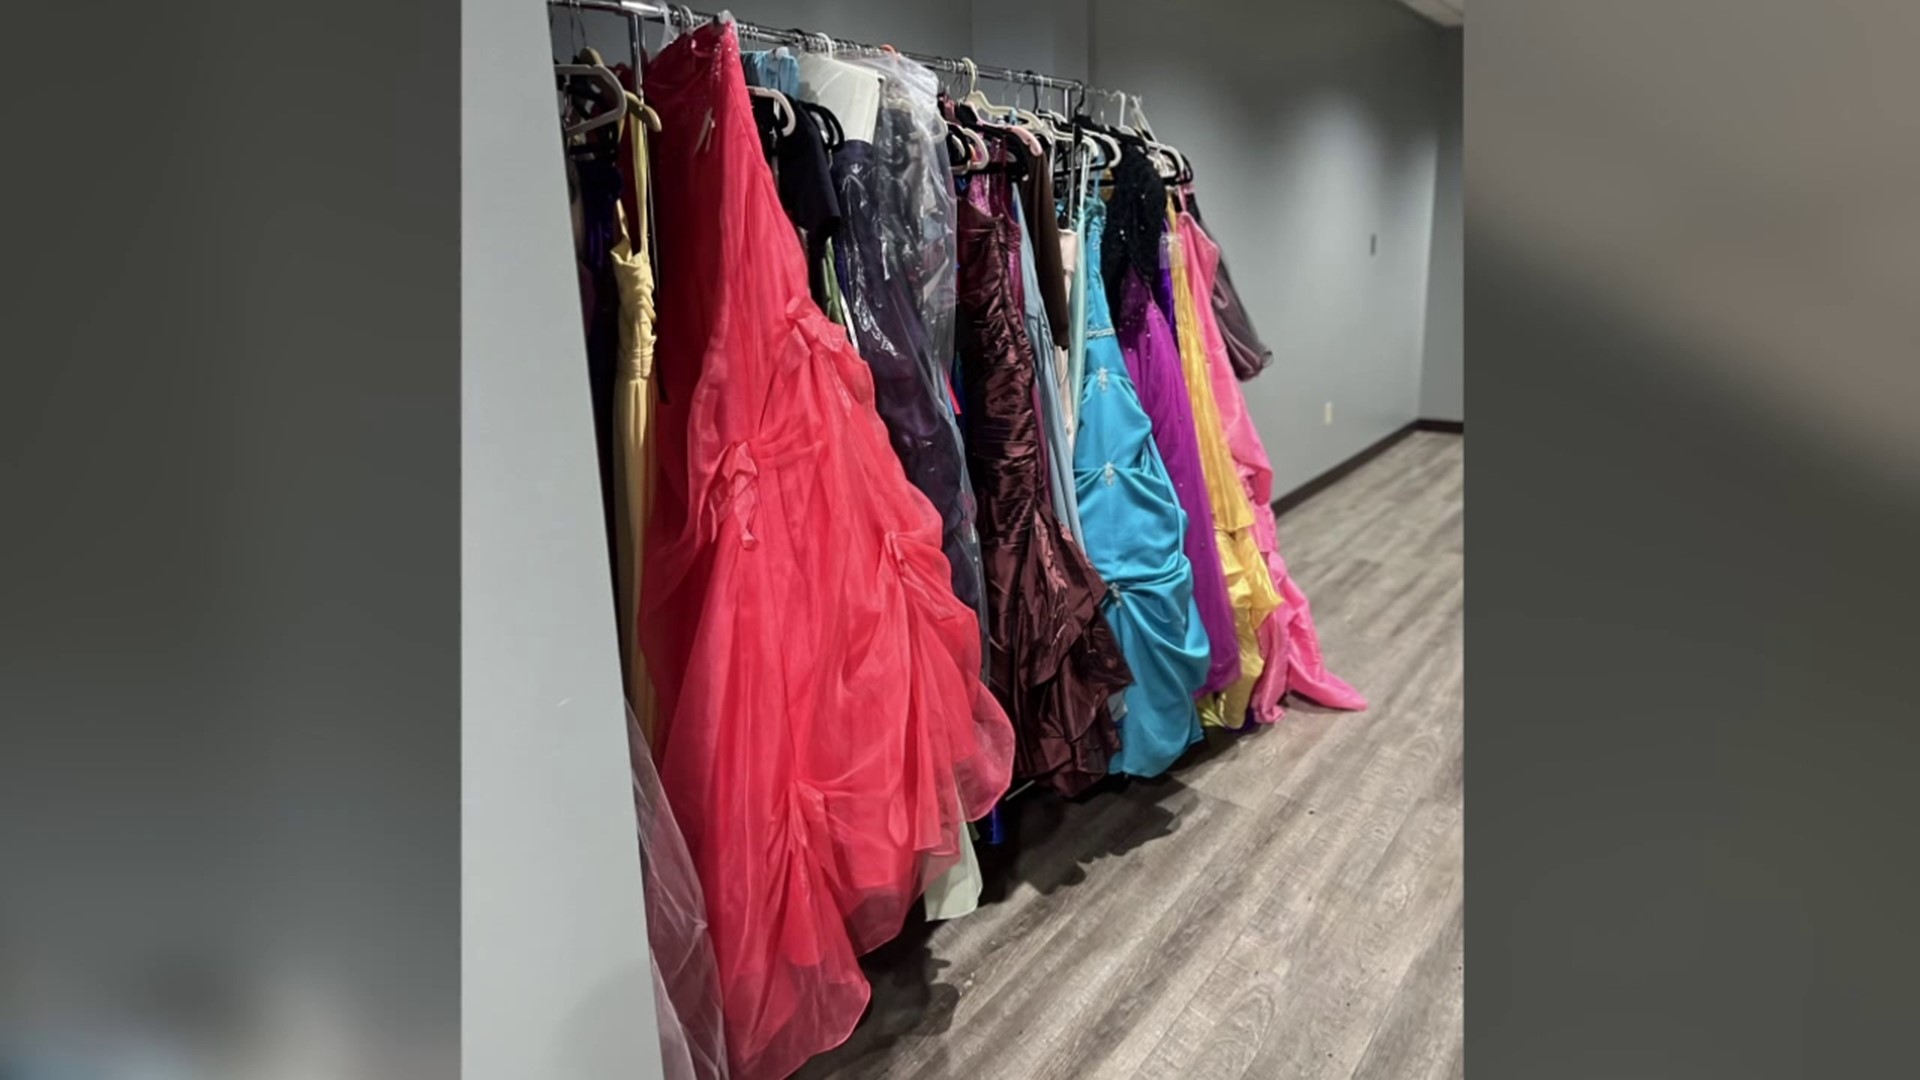 The Hazleton City Police Department is collecting gently used dresses to donate to the Hazleton Area High School students.